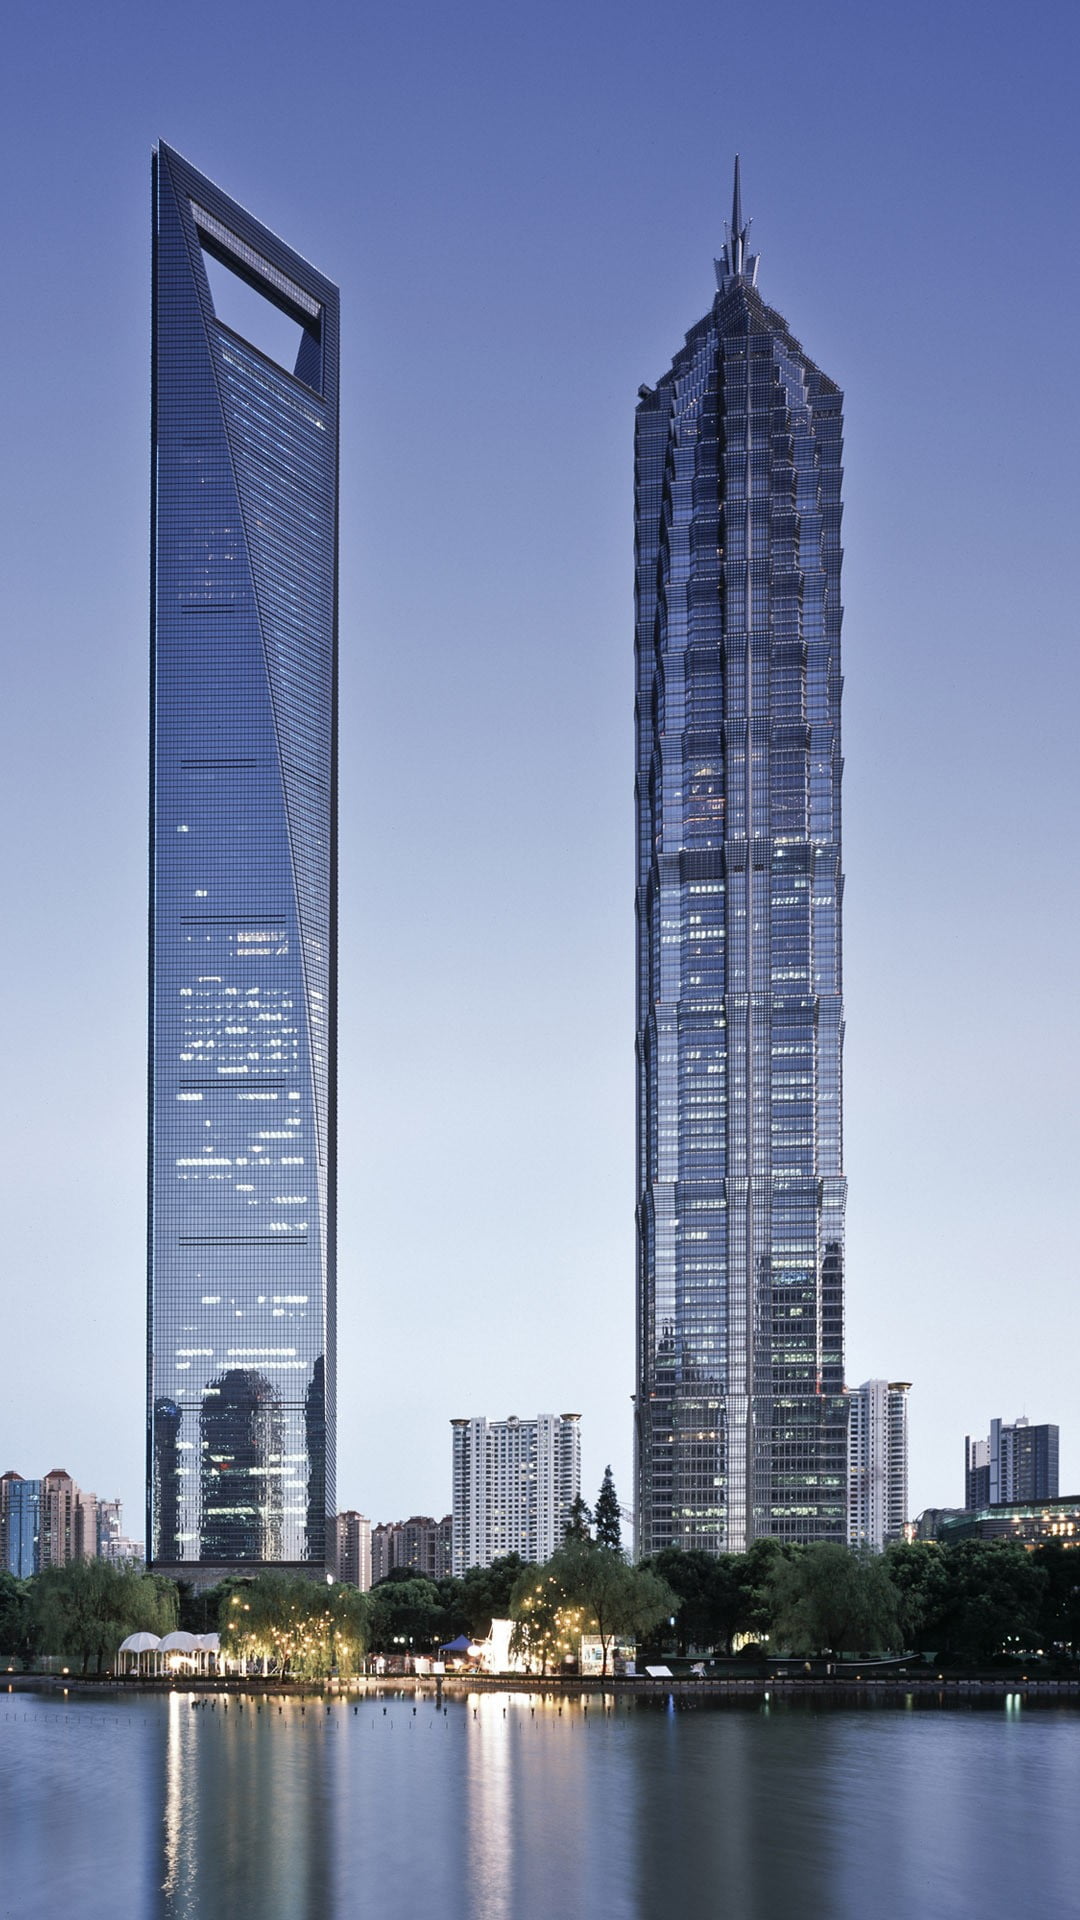 Shanghai trade center towers, architecture, portrait display